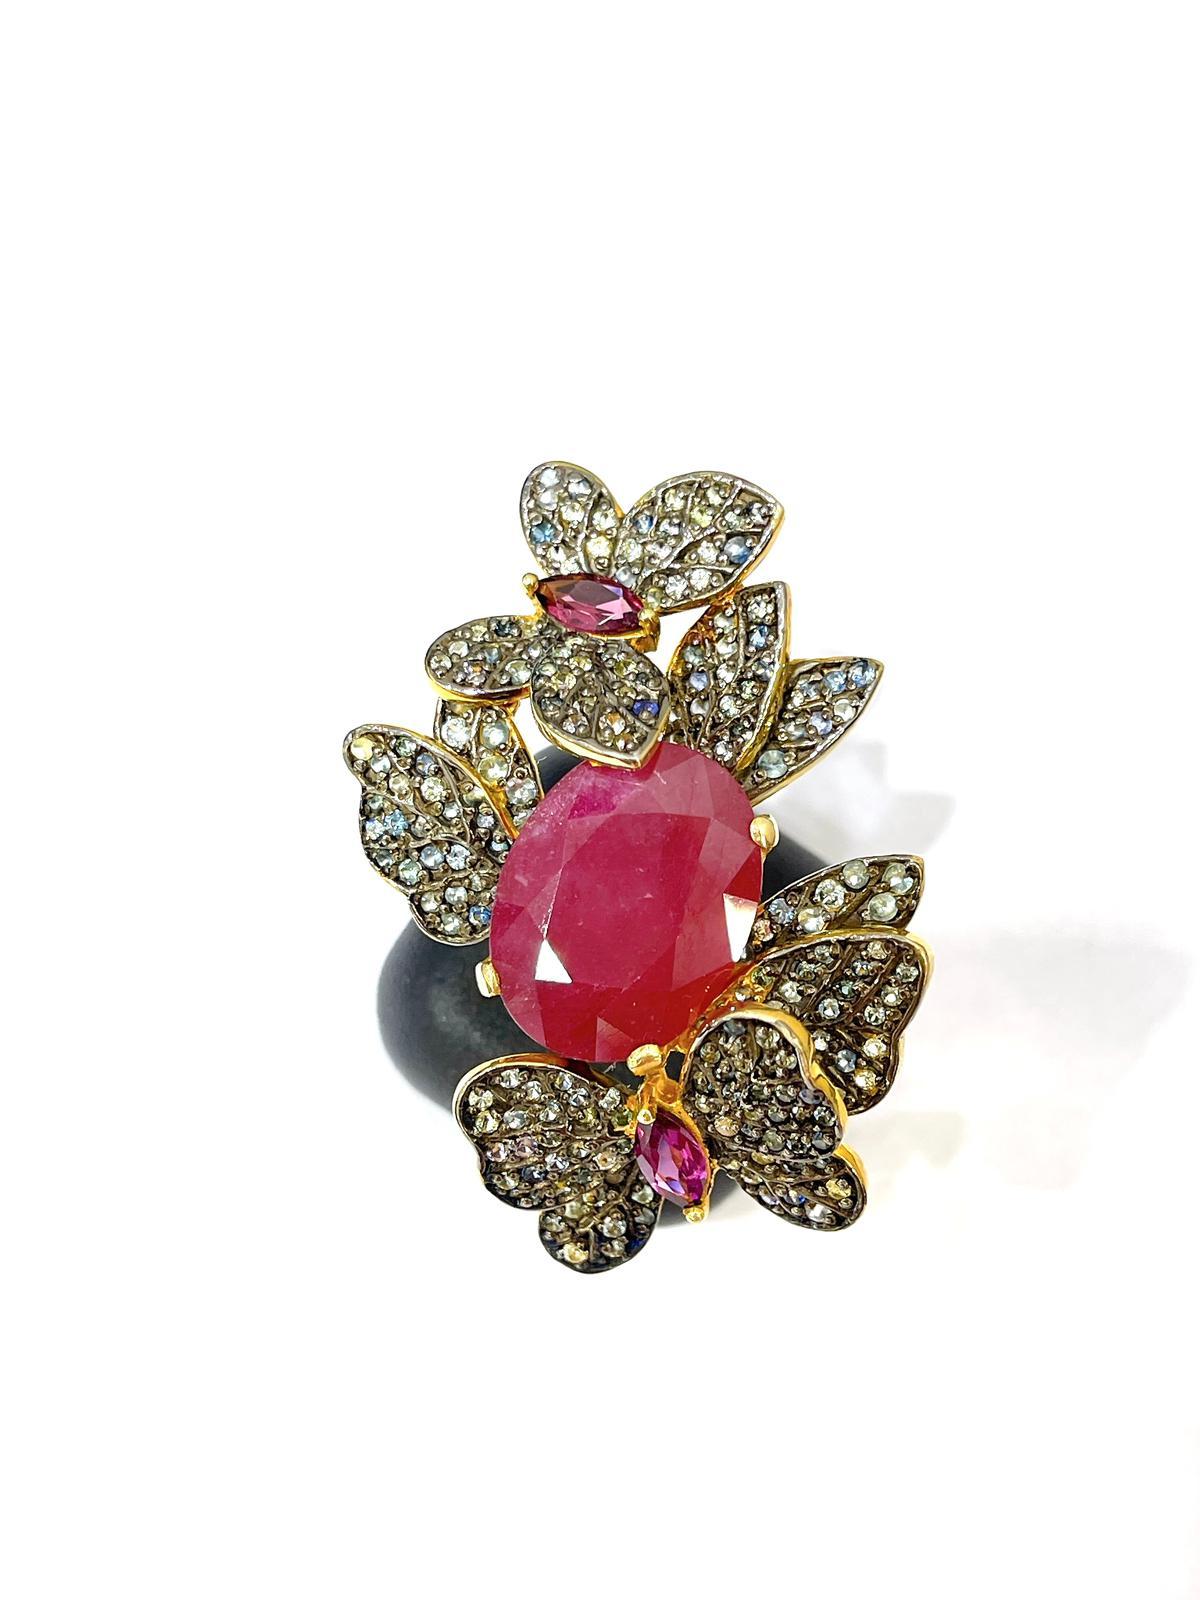 Bochic “Orient” Ruby & Multi Sapphire Vintage Cluster Ring Set 18K & Silver 

Red natural ruby, Oval cabochon shape - 6 carats 
Yellow natural sapphire 
Orange natural sapphire 
Pink natural sapphire 
Yellow natural sapphire 
Green natural Emerald